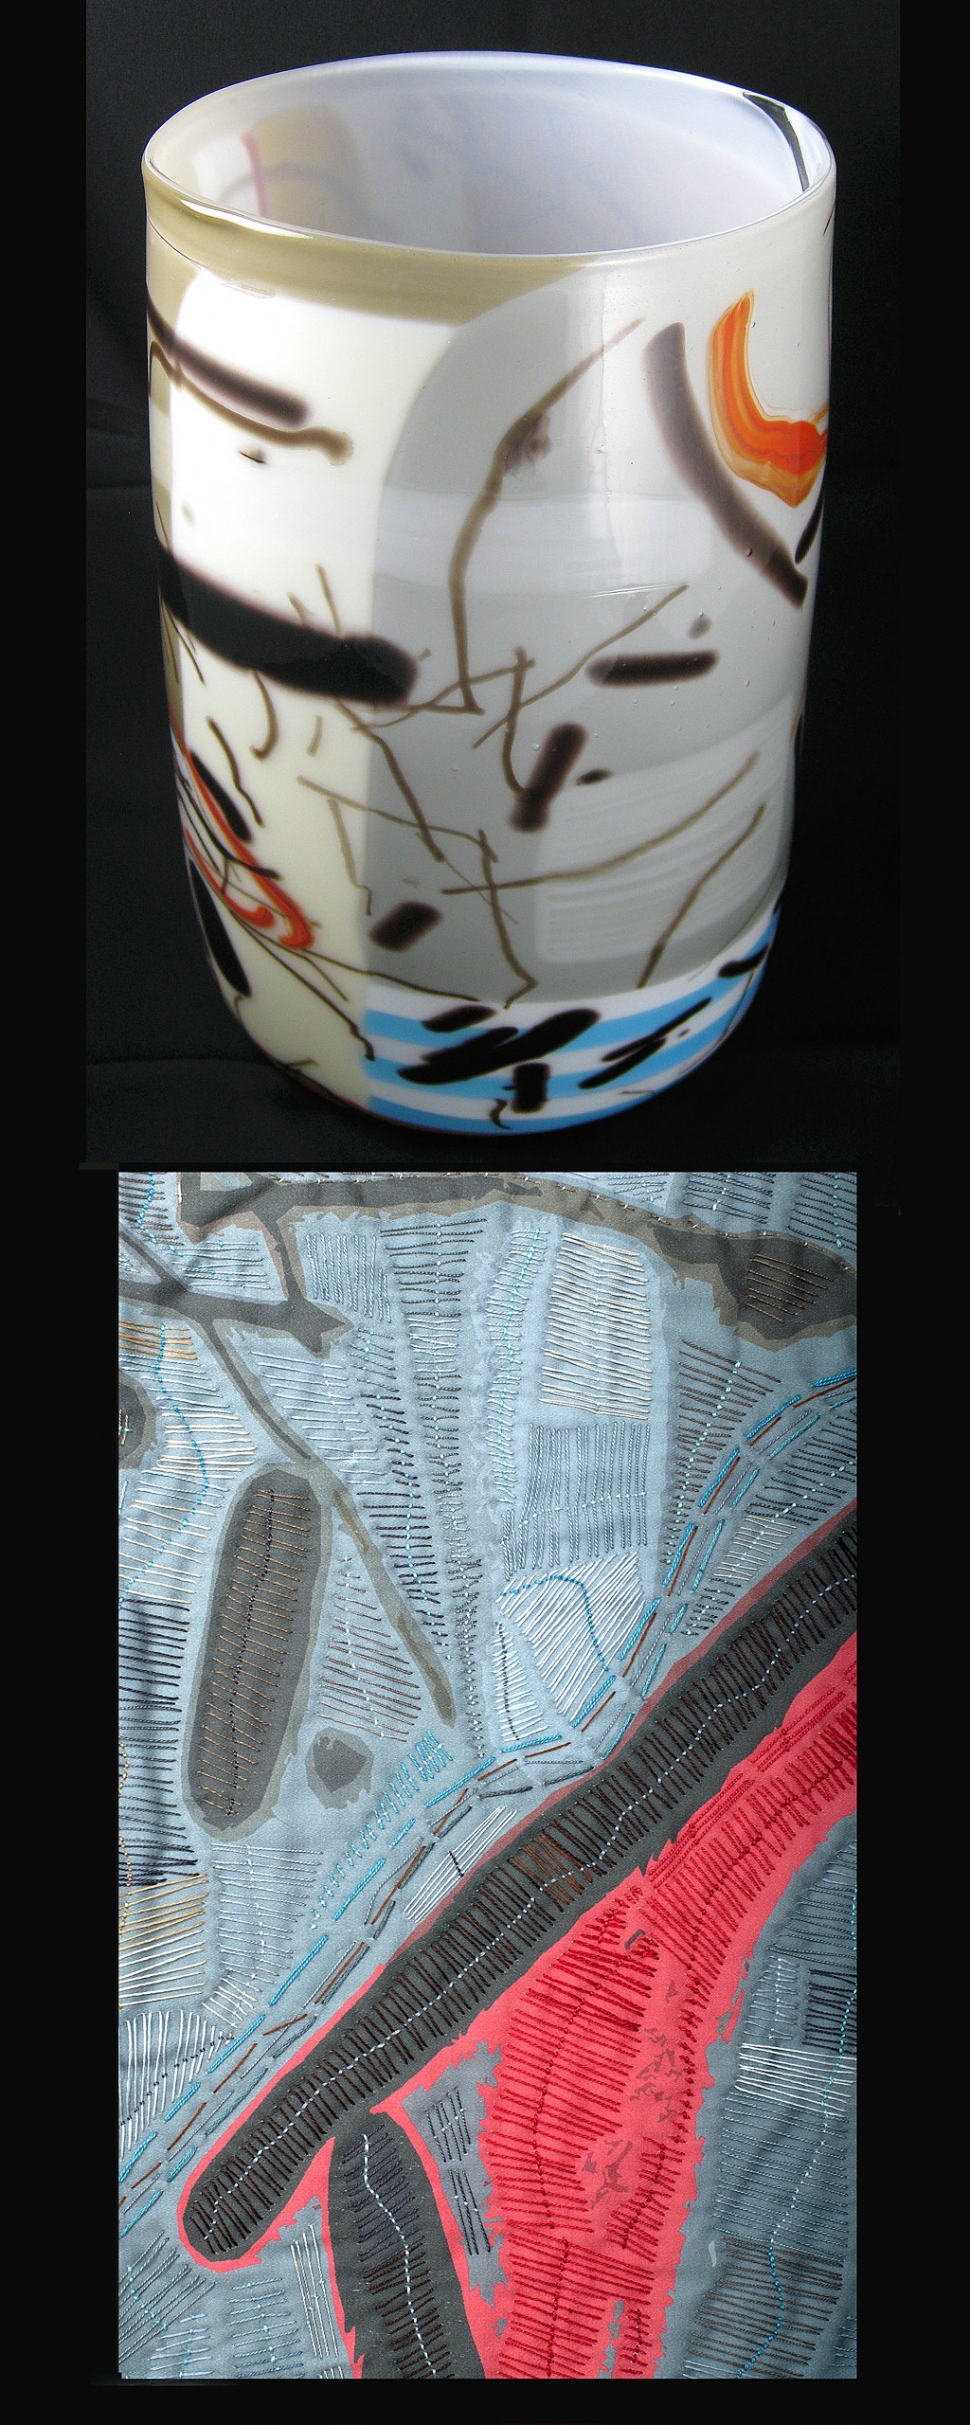 Glass art vase and photographed abstract design on digital print. Both works by Pamela Price Klebaum
